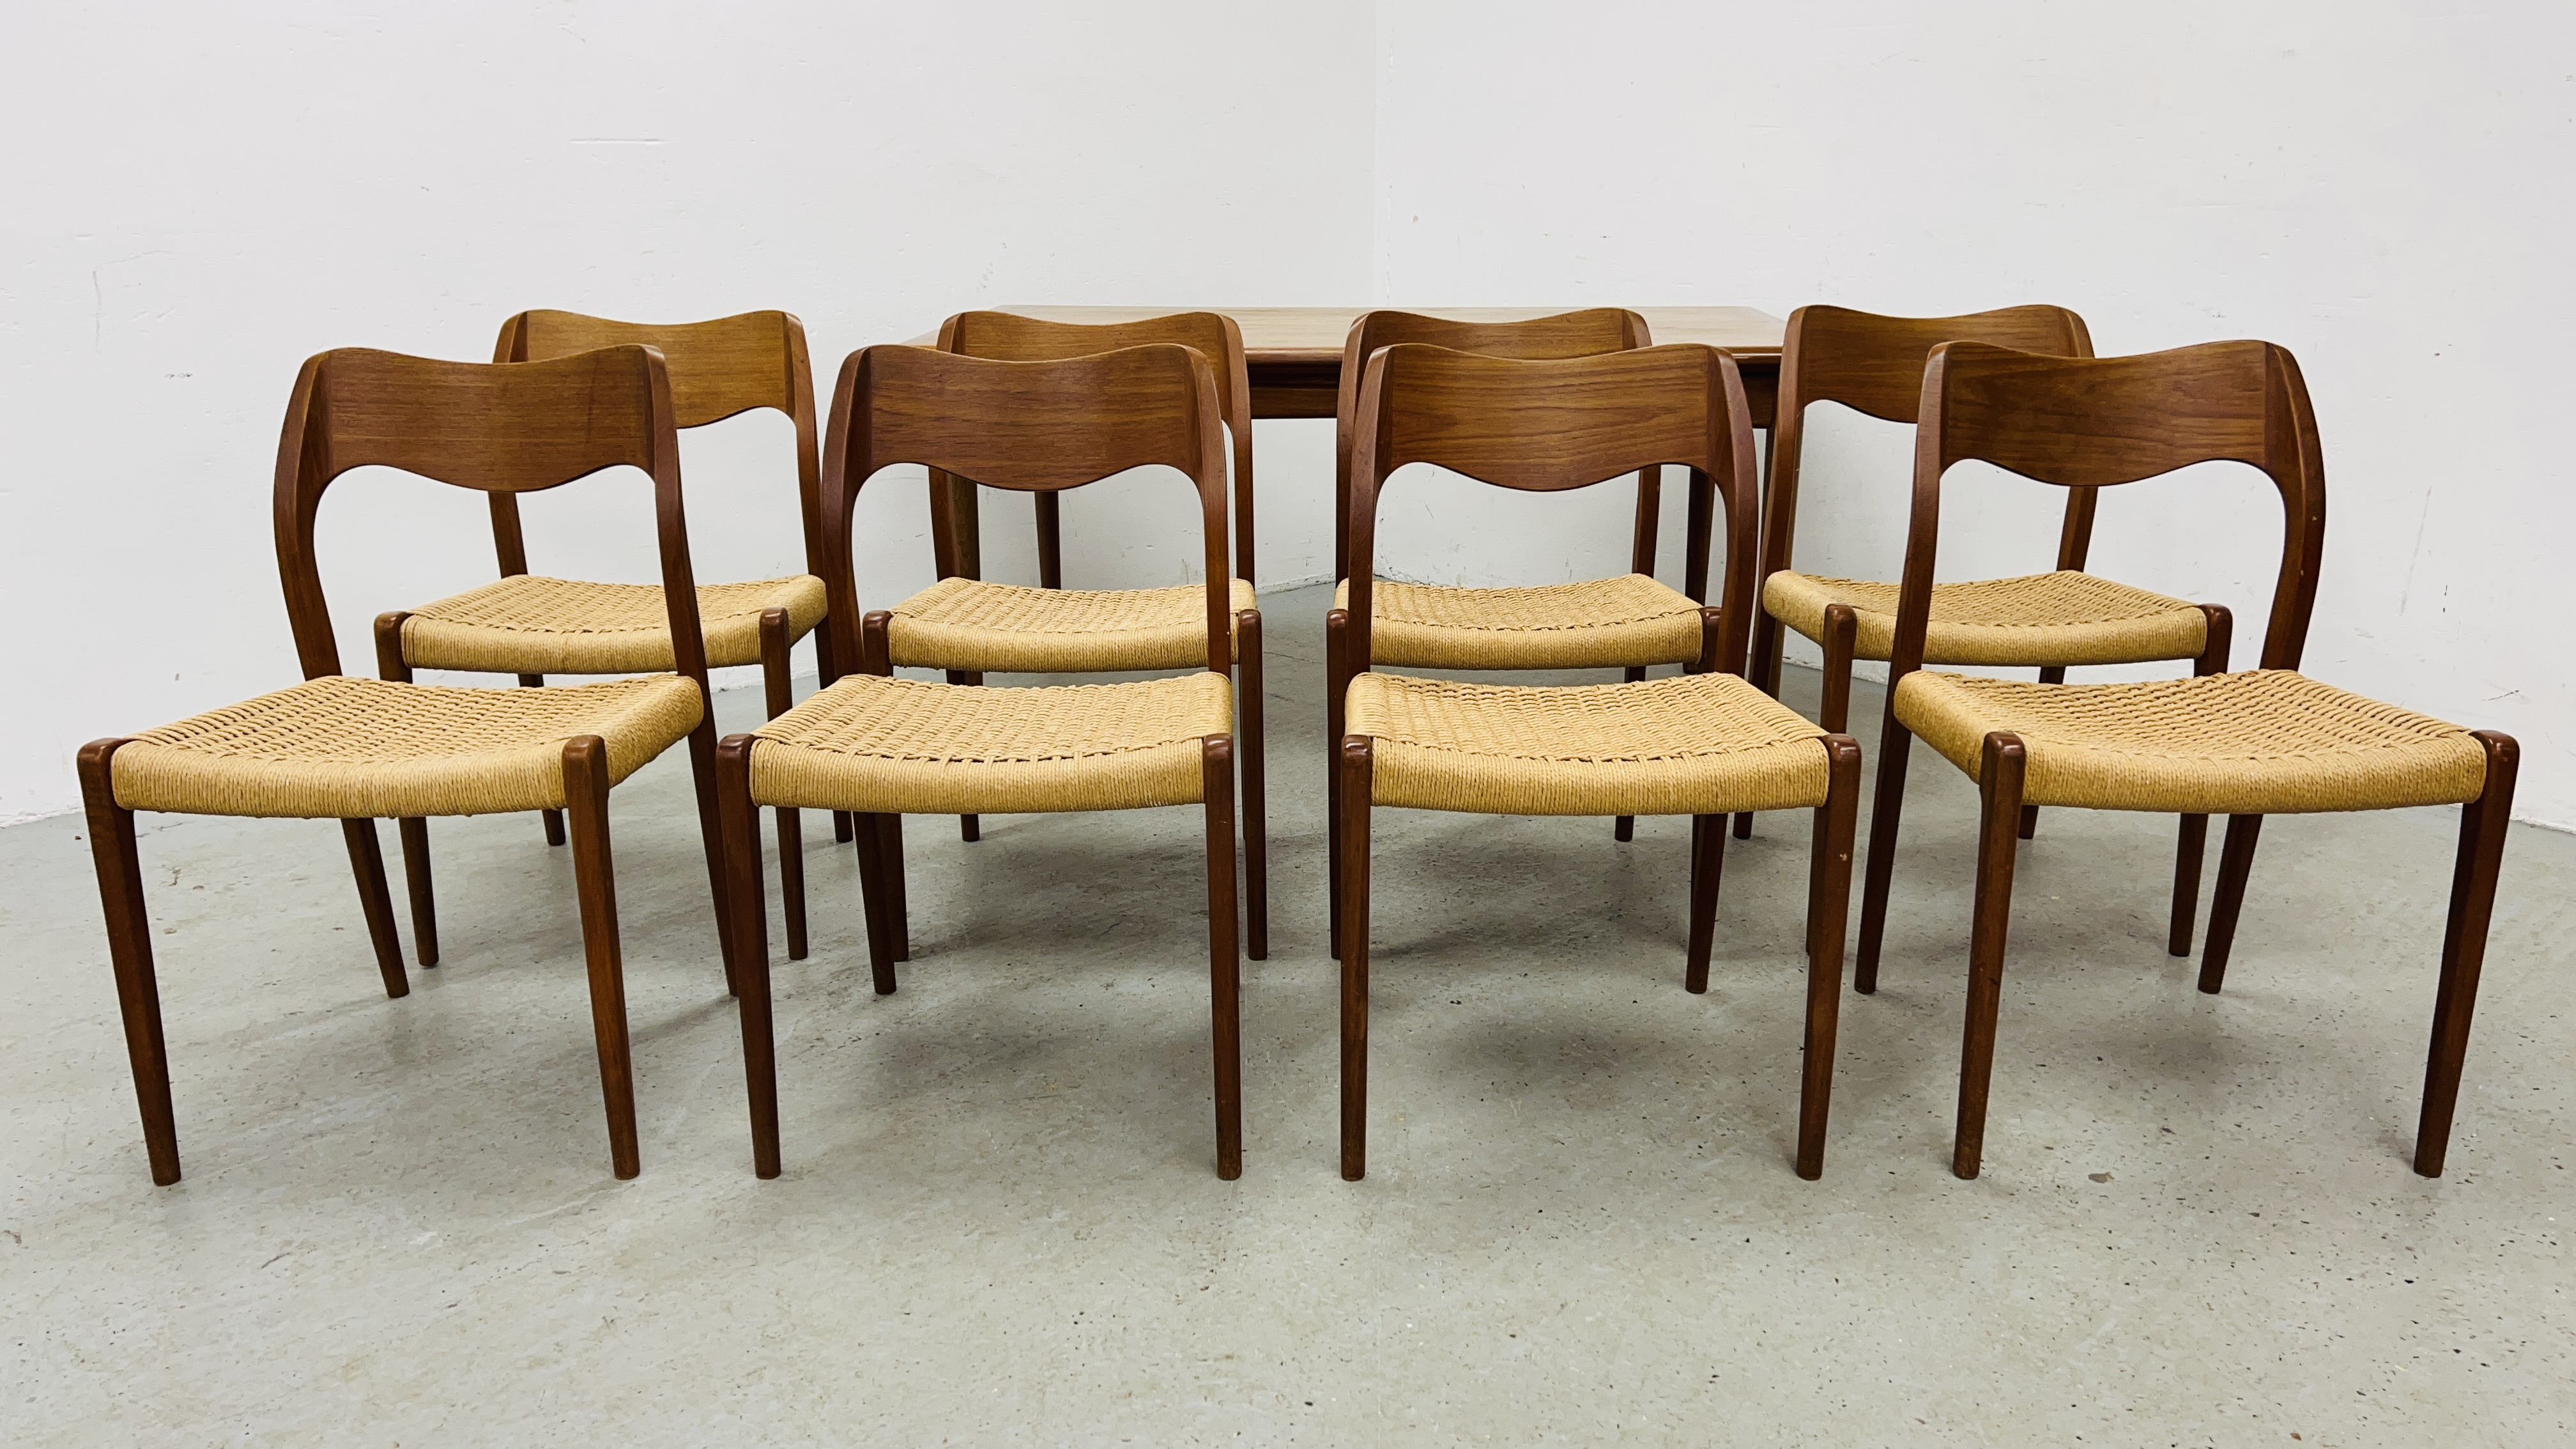 SET OF EIGHT J MOLLER DANISH TEAK DINING CHAIRS WITH WOVEN SISAL SEATS ALONG WITH A DRAWER LEAF - Image 3 of 48